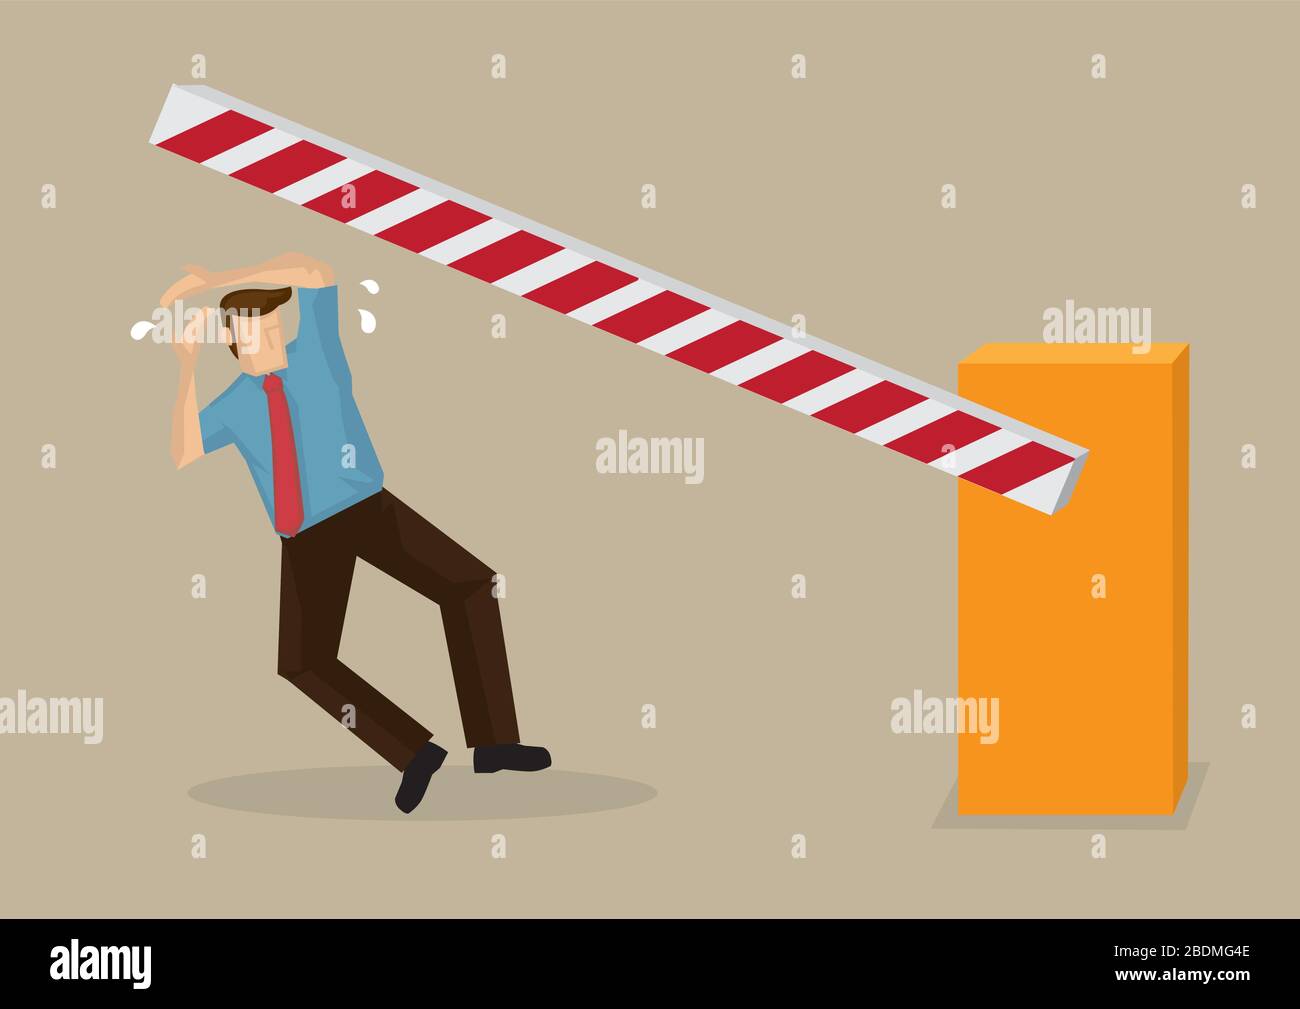 Cartoon man knocked off balance by automated bar barrier at boom gate. Vector illustration on concept for unexpected hazards and personal accidents is Stock Vector